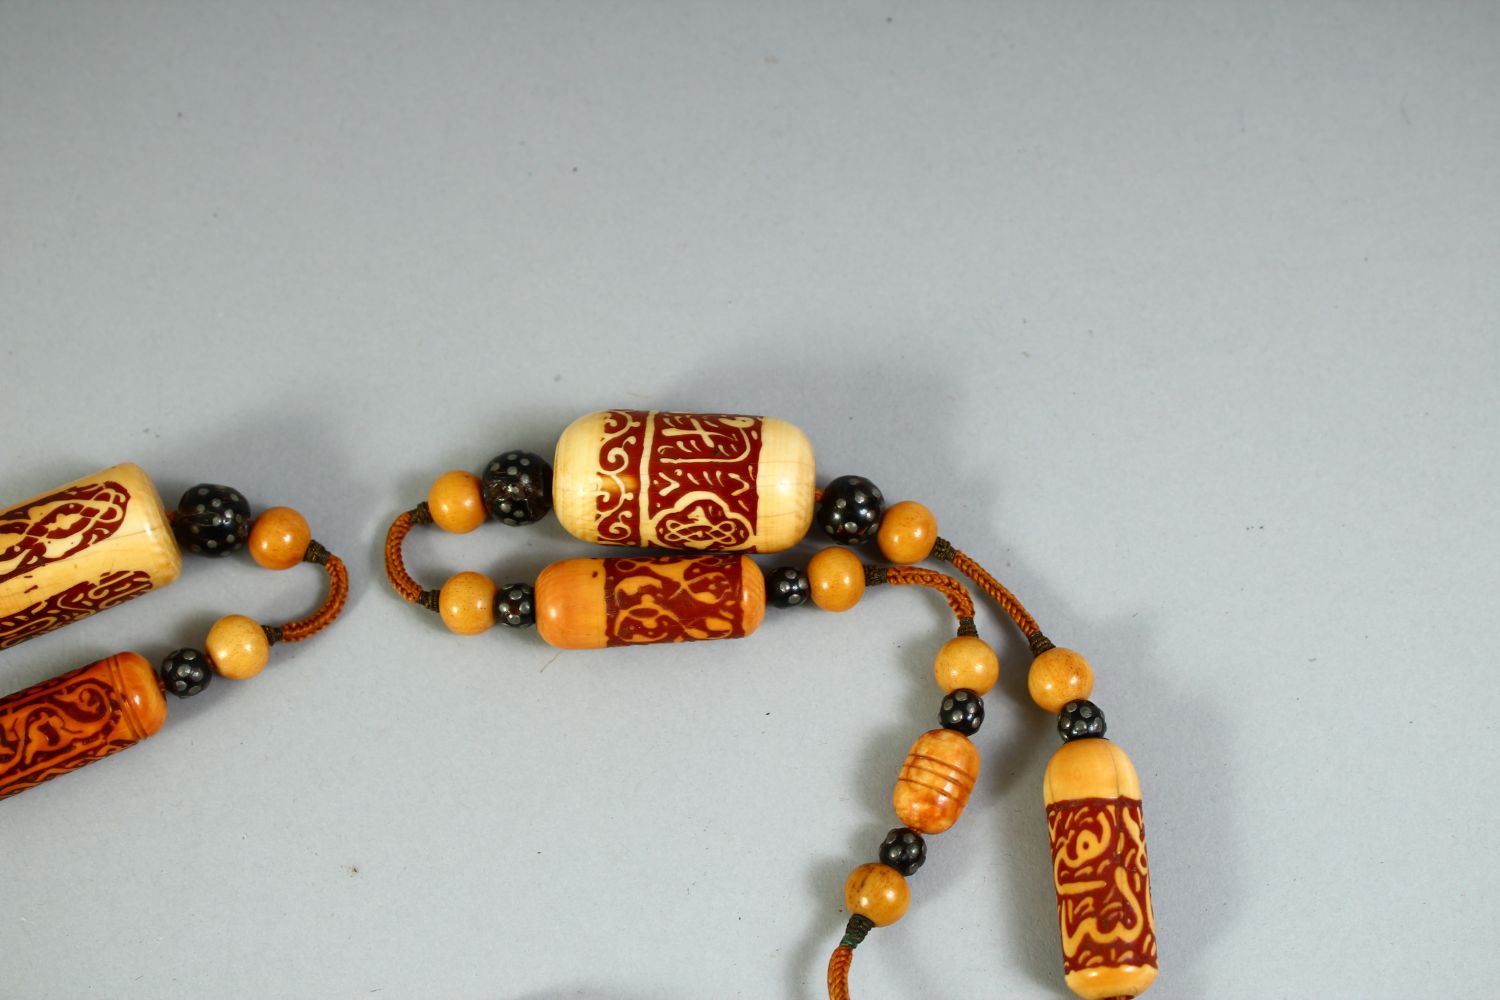 A RARE 18TH CENTURY OR EARLIER OTTOMAN IVORY, WALRUS AND BLACK CORAL BEADED NECKLACE. - Image 2 of 6